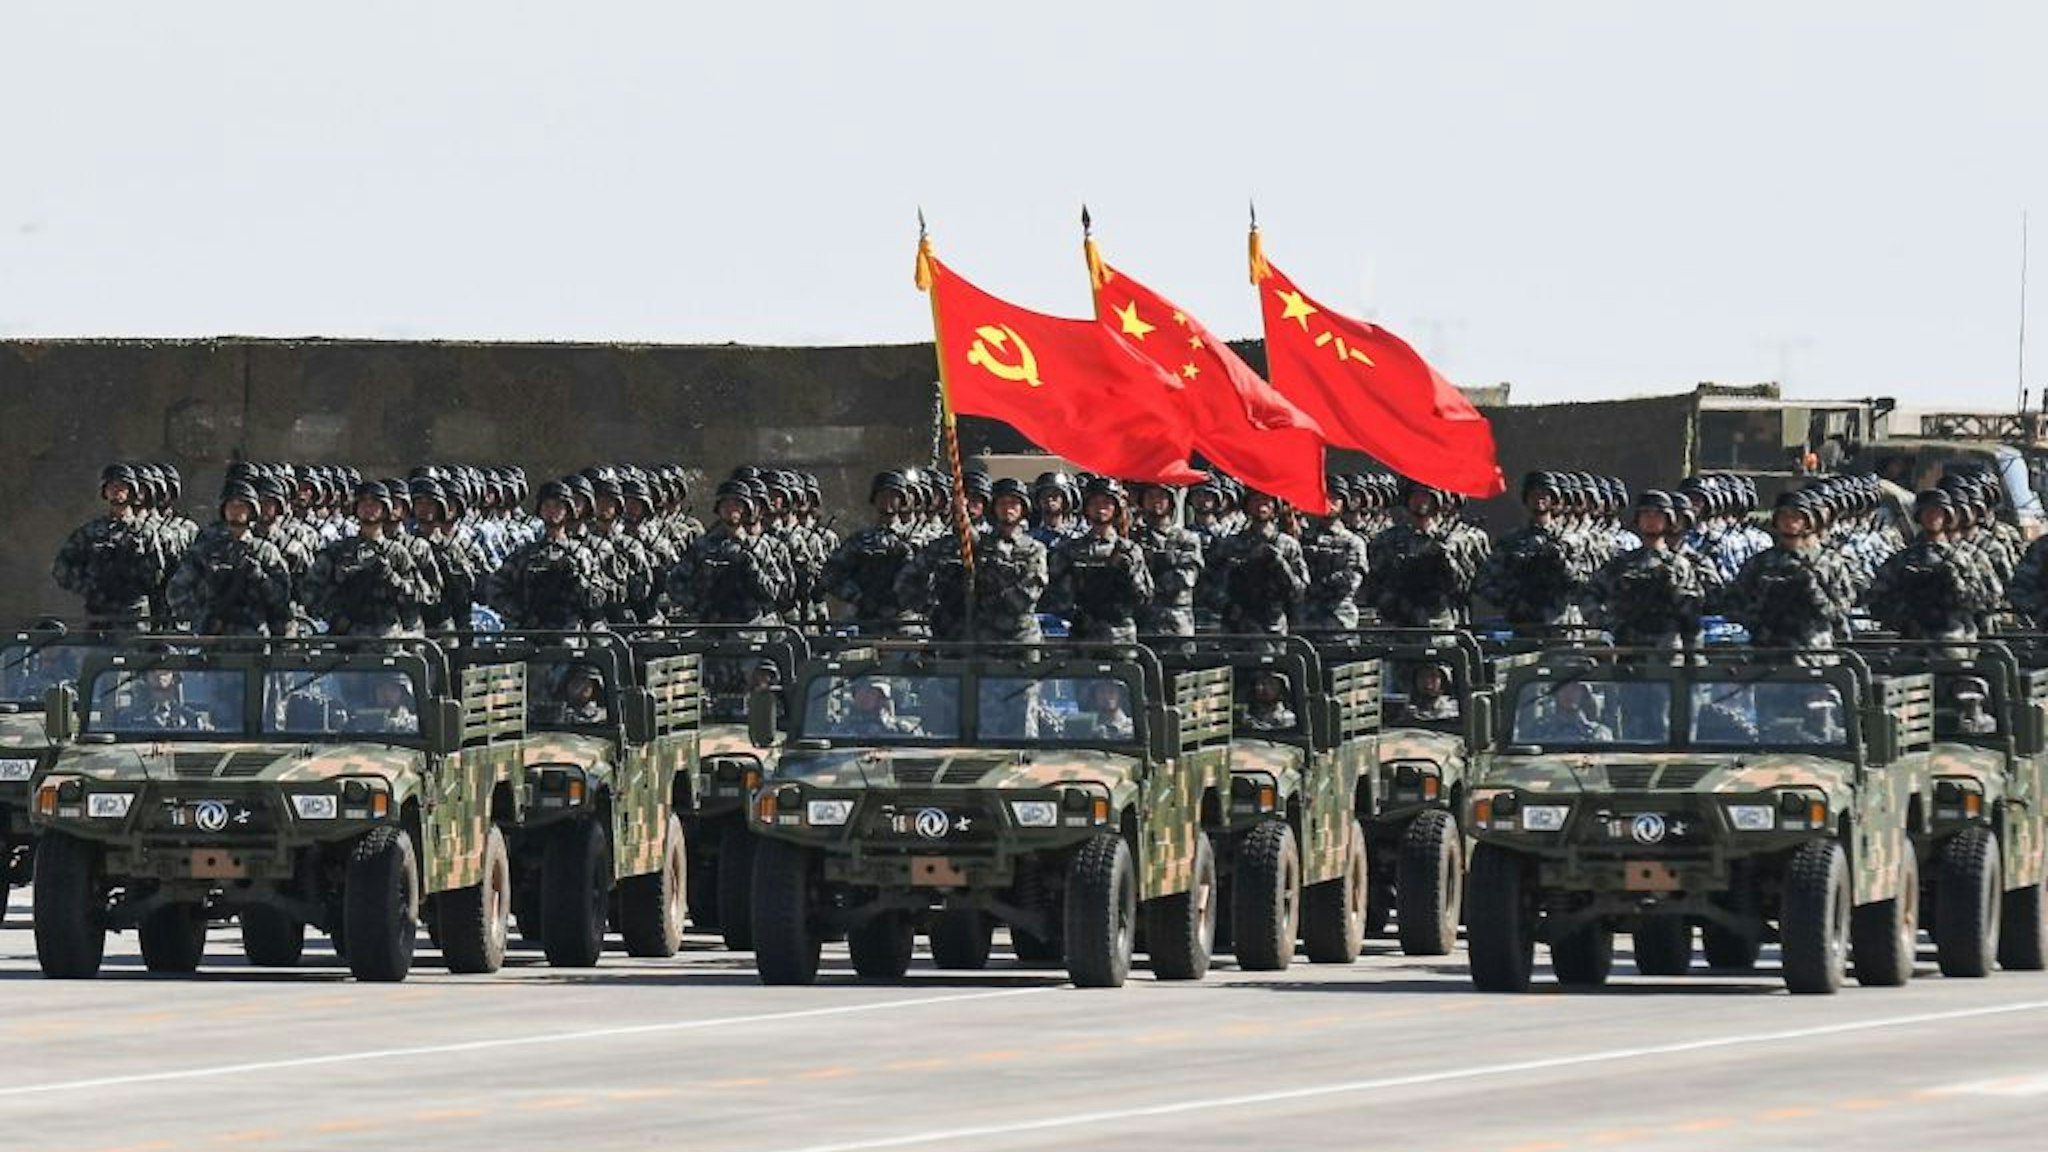 Chinese soldiers carry the flags of (L to R) the Communist Party, the state, and the People's Liberation Army during a military parade at the Zhurihe training base in China's northern Inner Mongolia region on July 30, 2017. China held a parade of its armed forces on July 30 to mark the 90th anniversary of the People's Liberation Army (PLA) in a display of military might. / AFP PHOTO / STR / China OUT